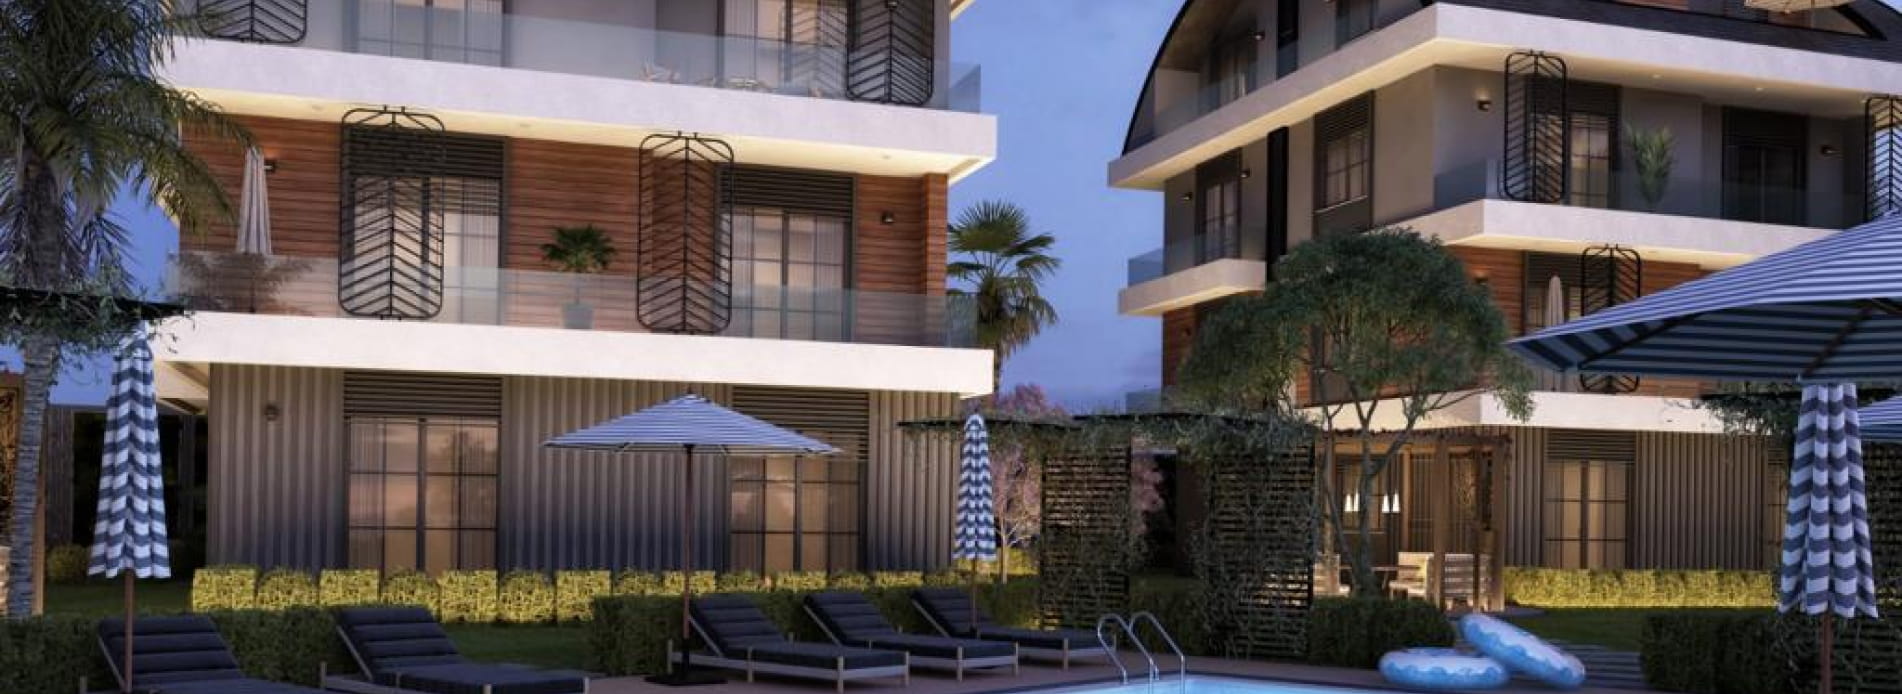 New investment project in Antalya, Loft style